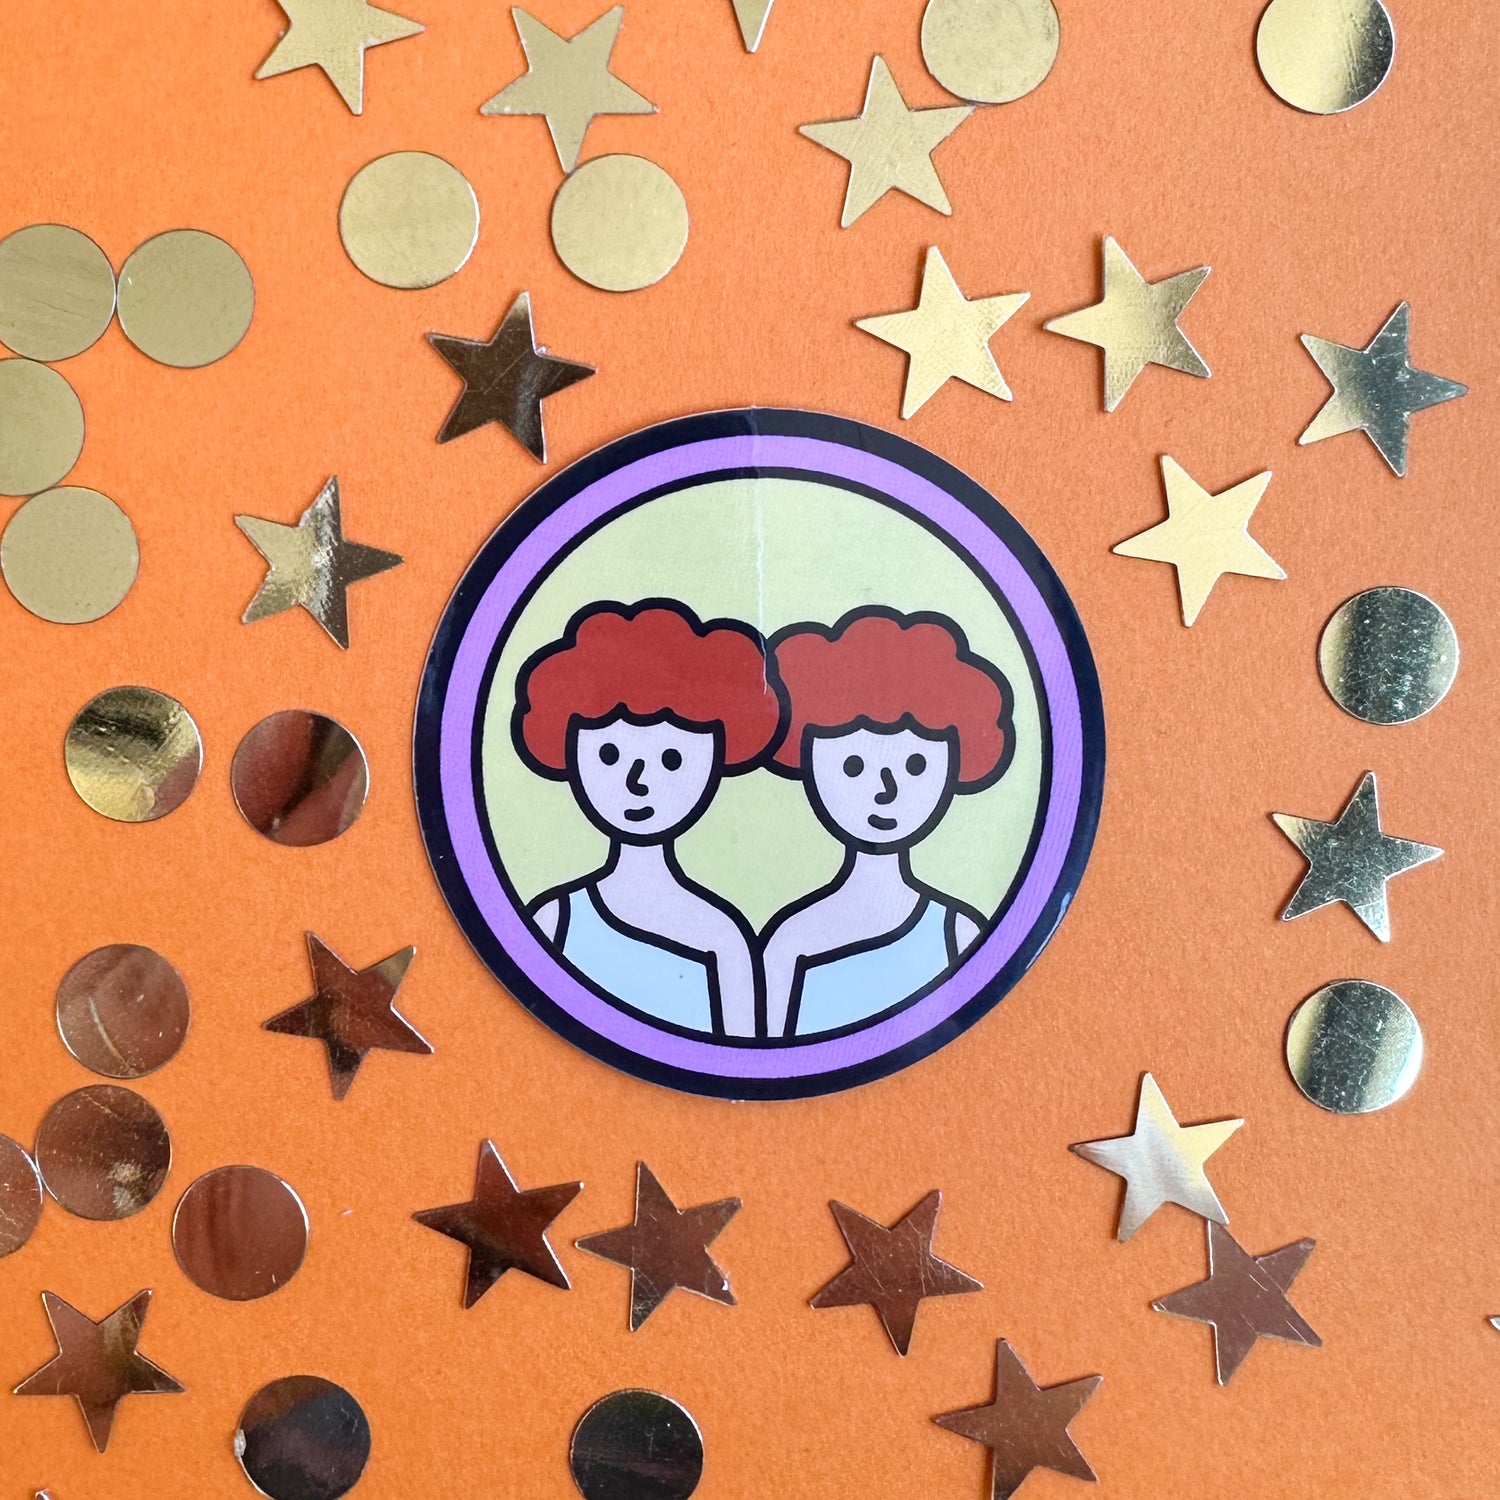 A circular sticker with twins on it with red hair that represent the Gemini zodiac sign. The sticker is on an orange background with gold stars and circles around it. 